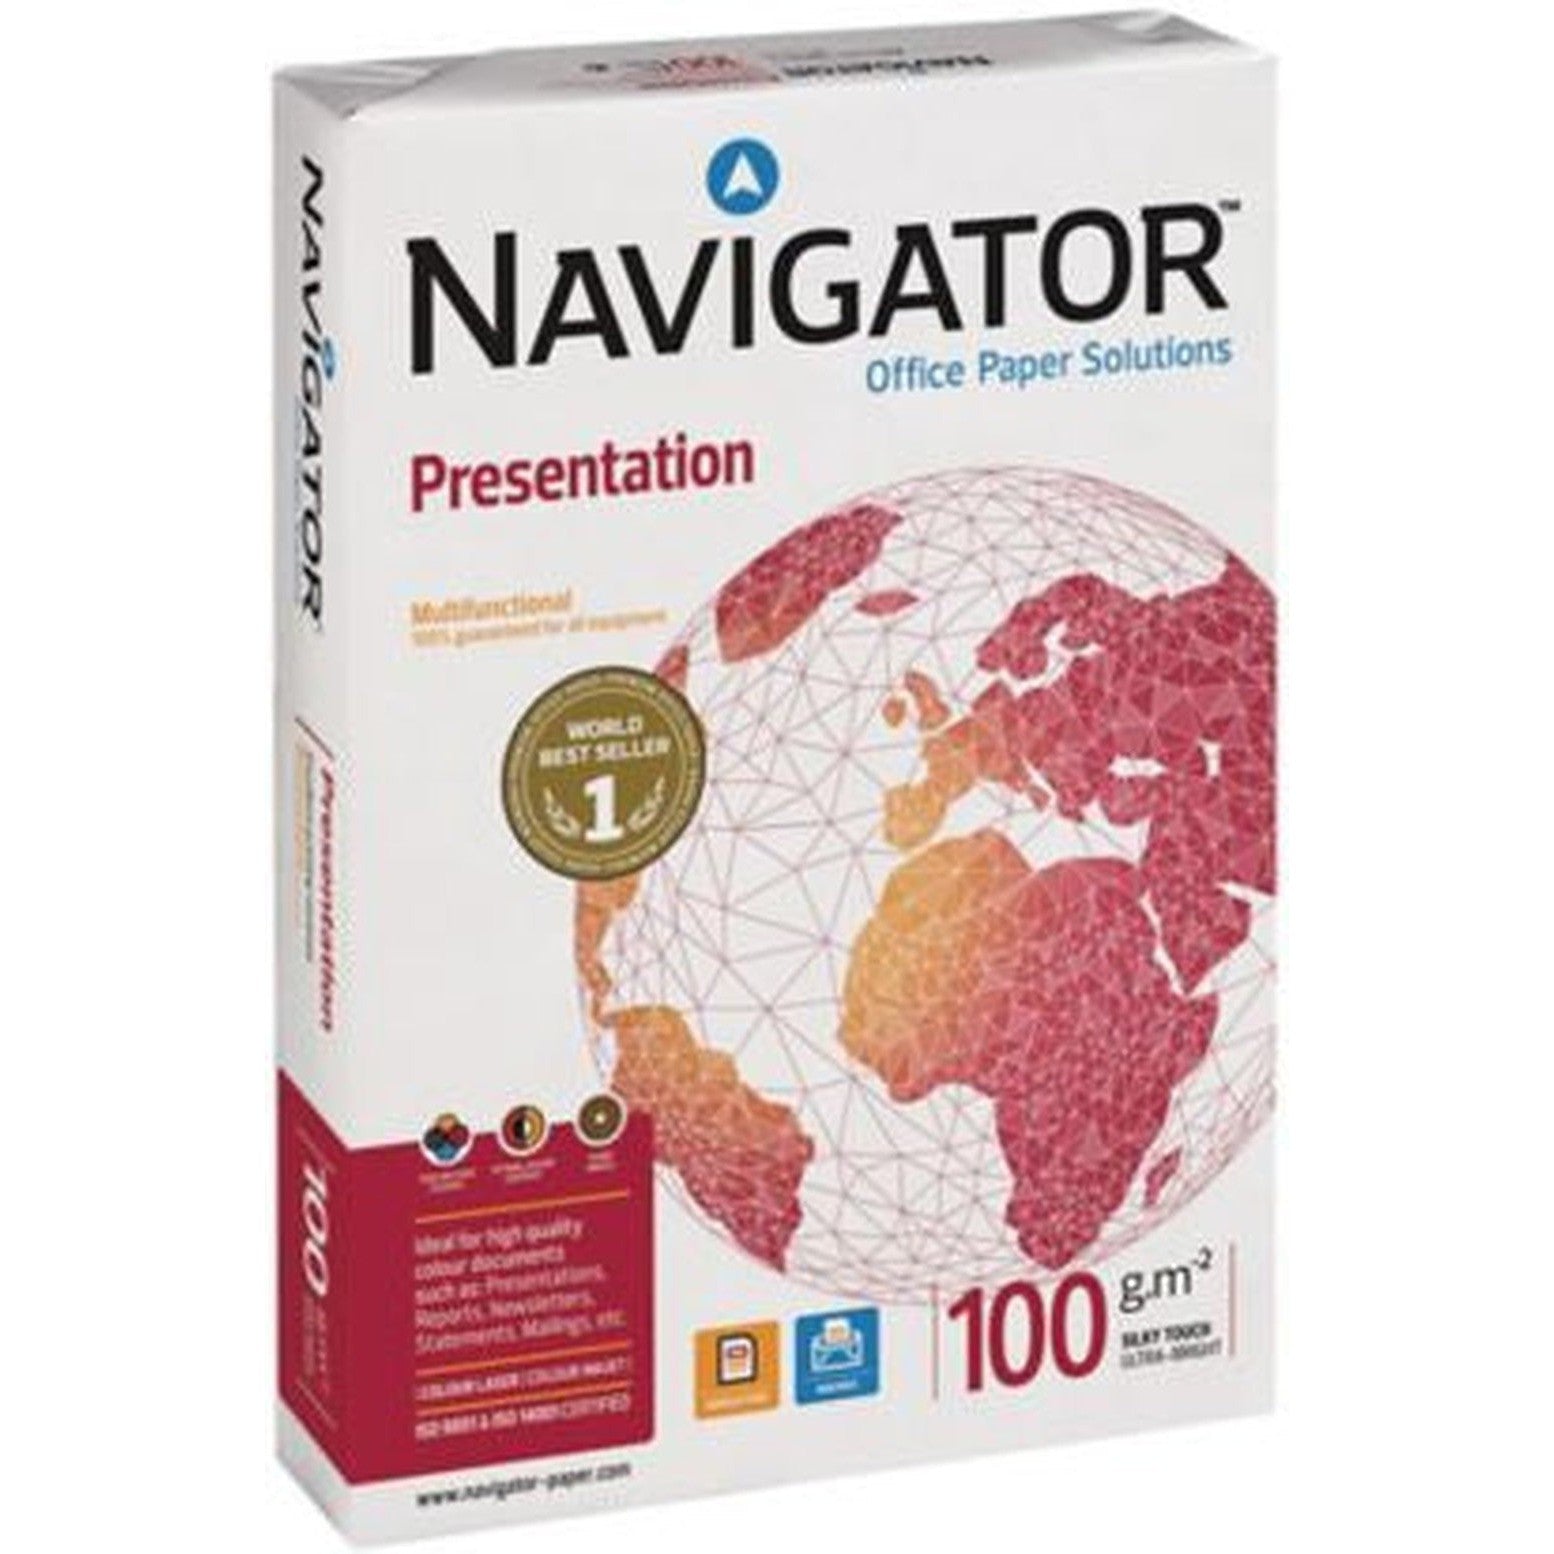 Navigator Presentation Paper 100Gsm 500 Sheets Per Ream A4 White-Stationery Paper-Other-Star Light Kuwait